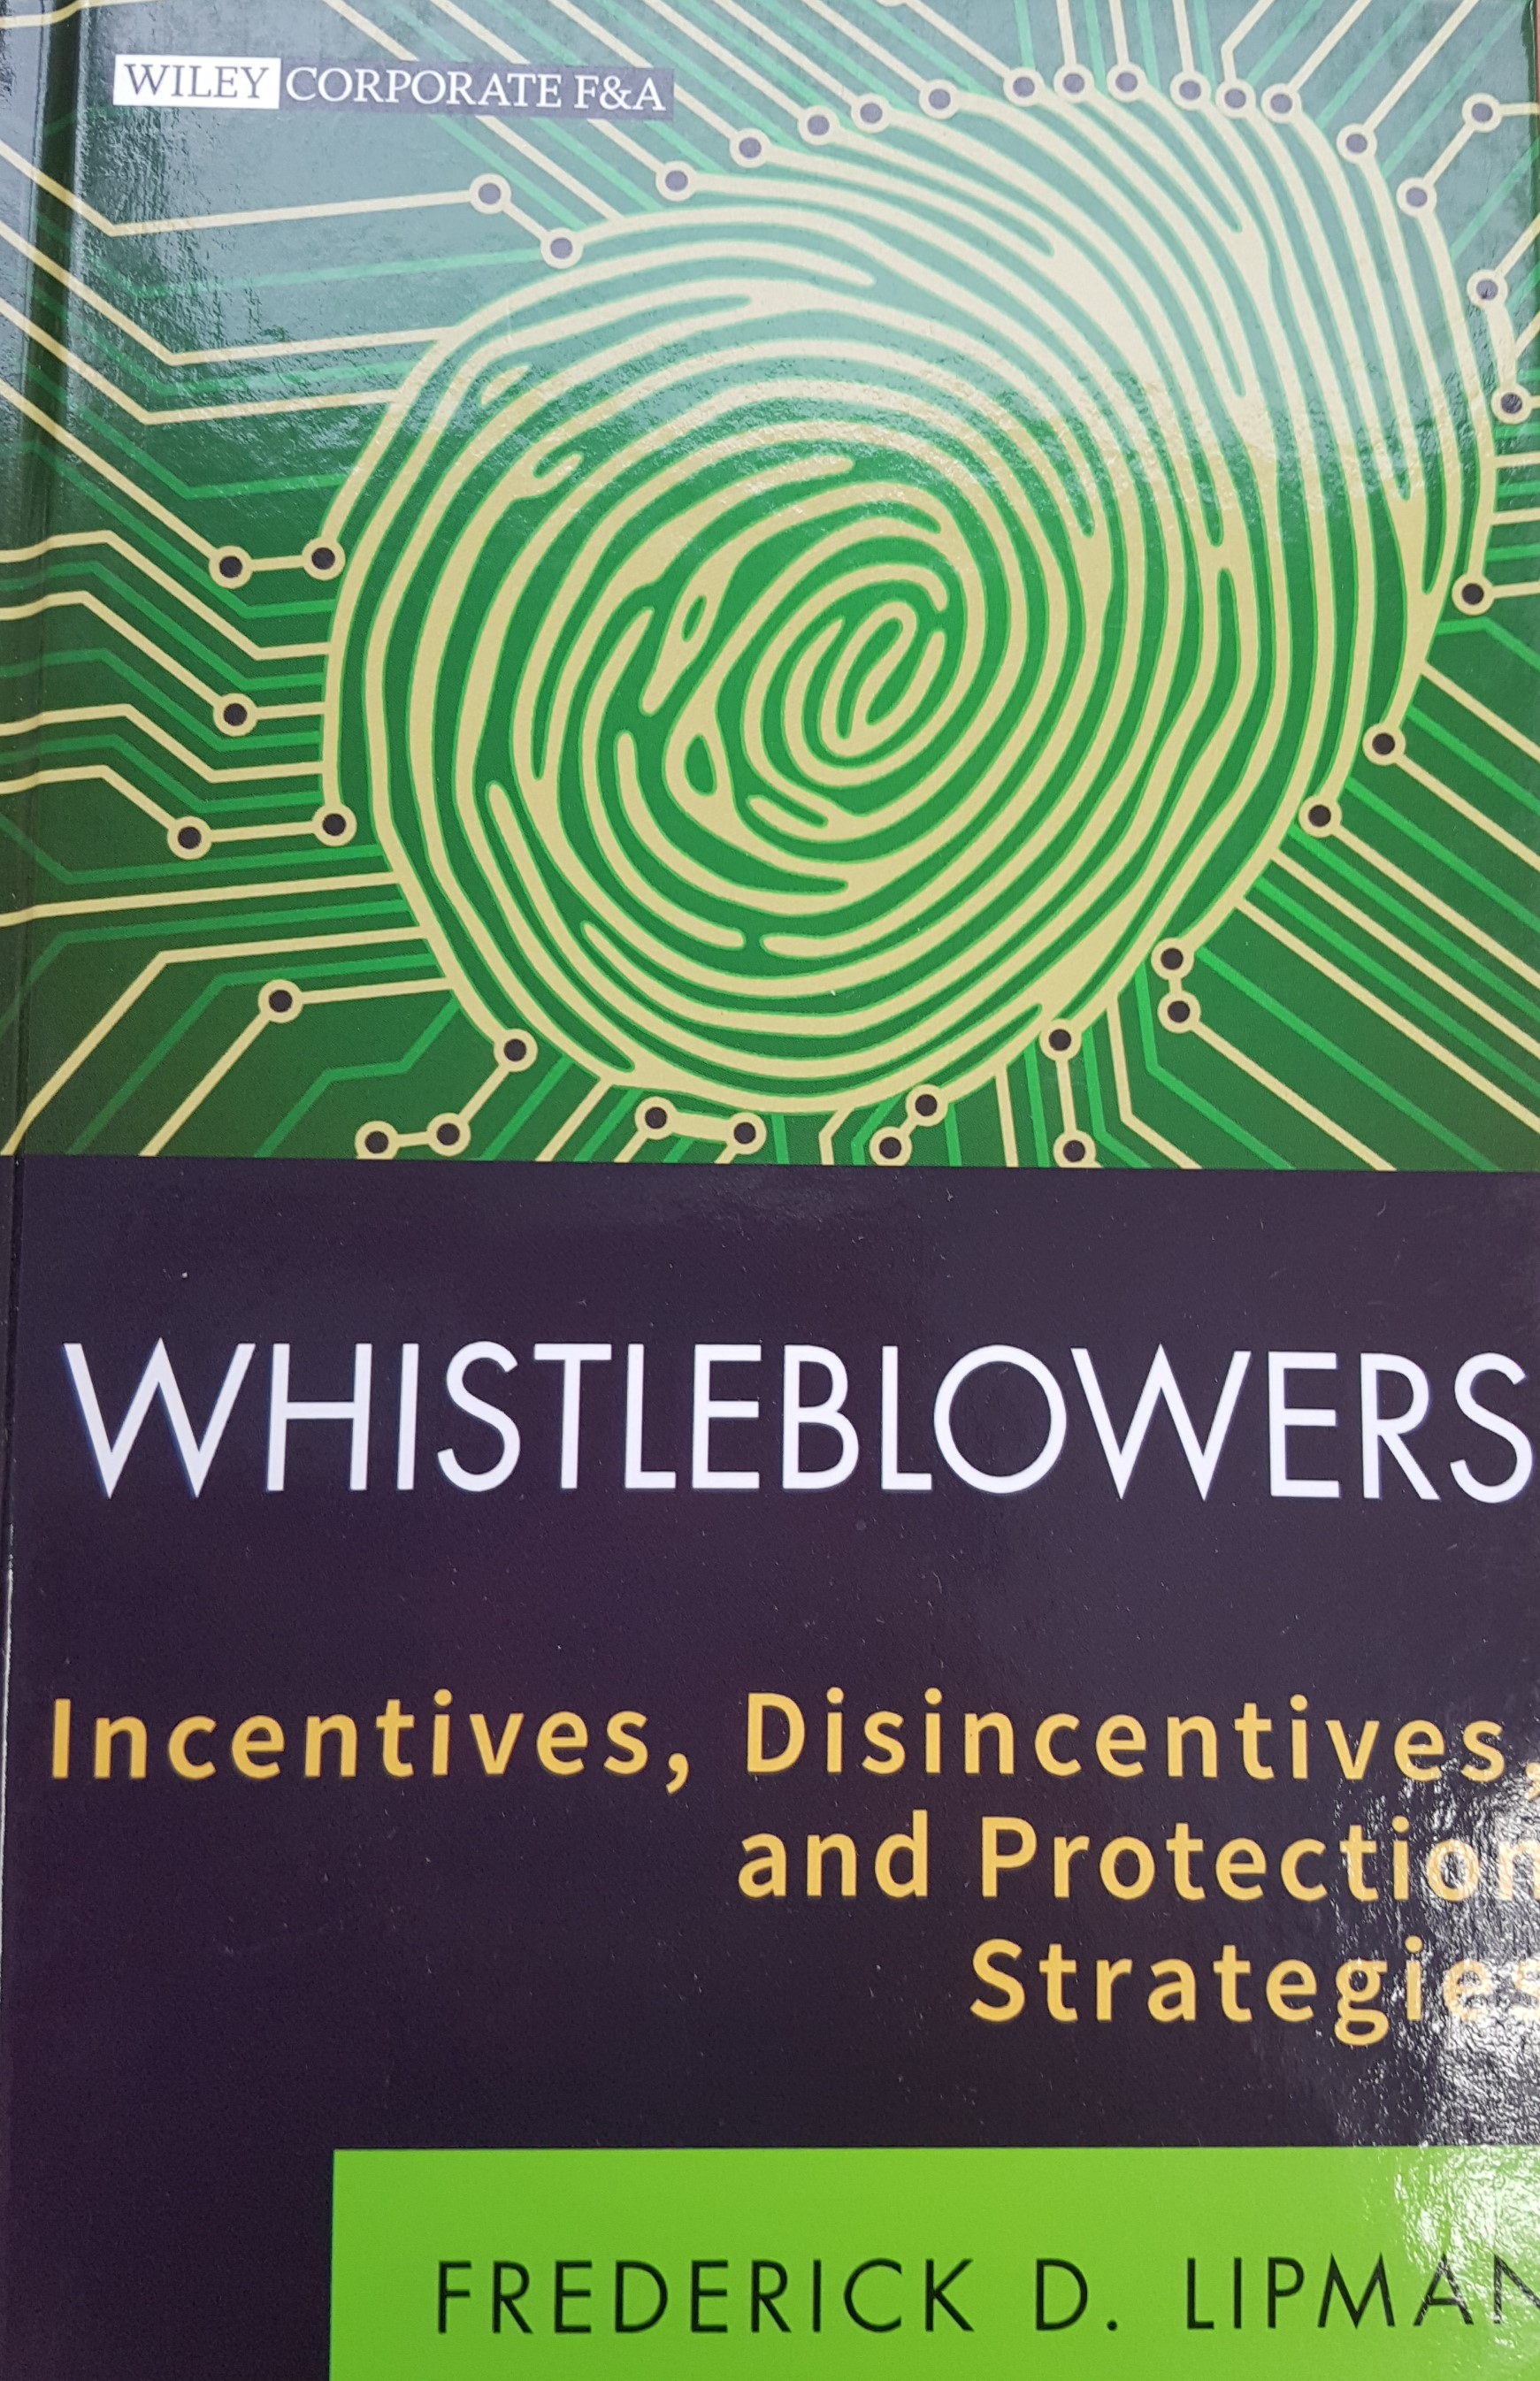 Description Whistleblowers: Incentives, Disincentive, and Protection Strategies